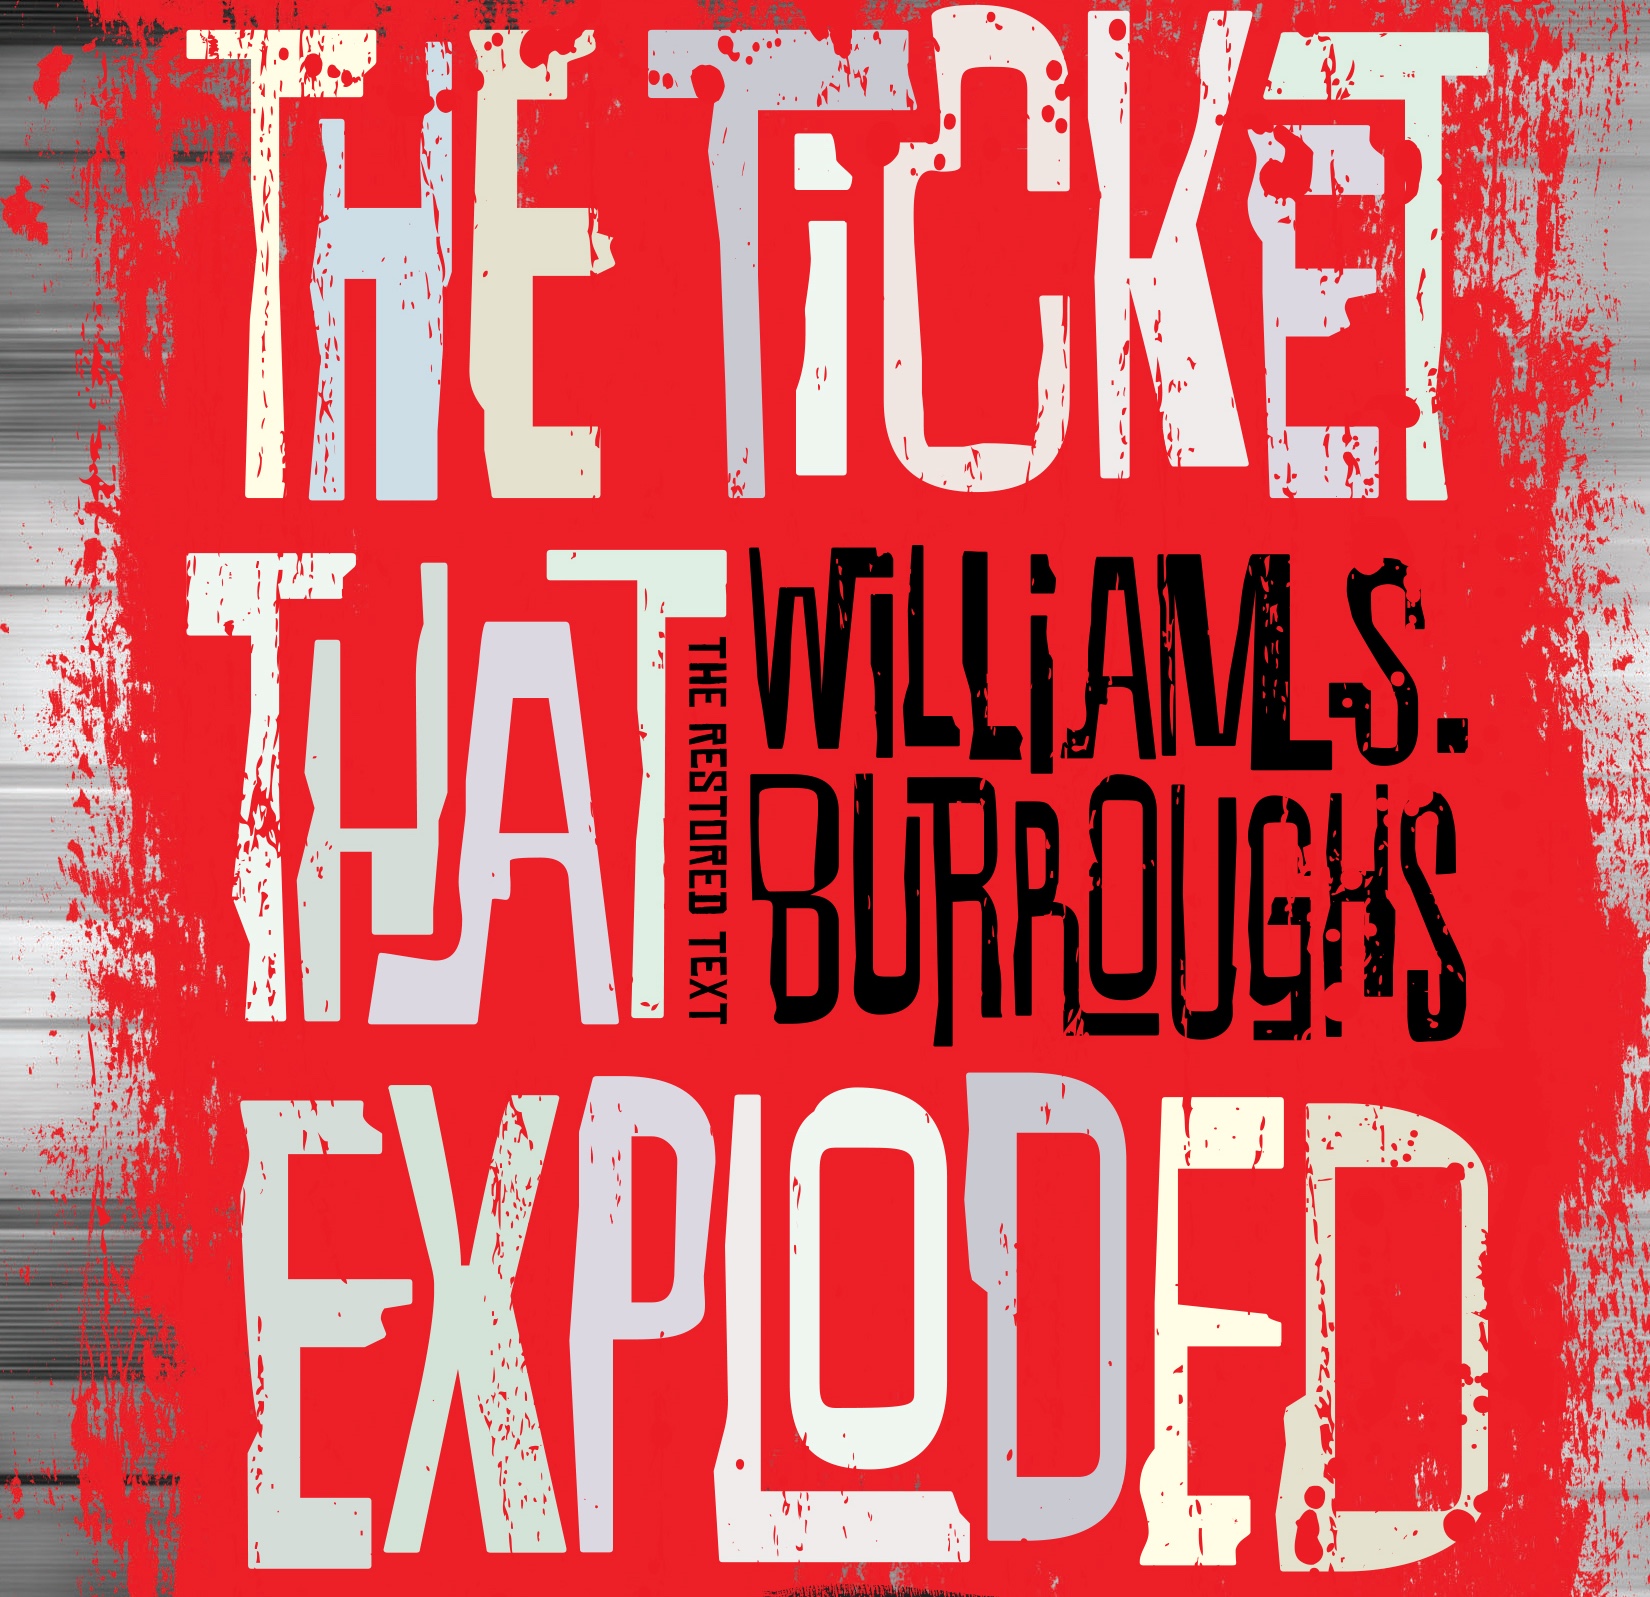 Exploring “The Ticket That Exploded”: A William S. Burroughs Masterpiece